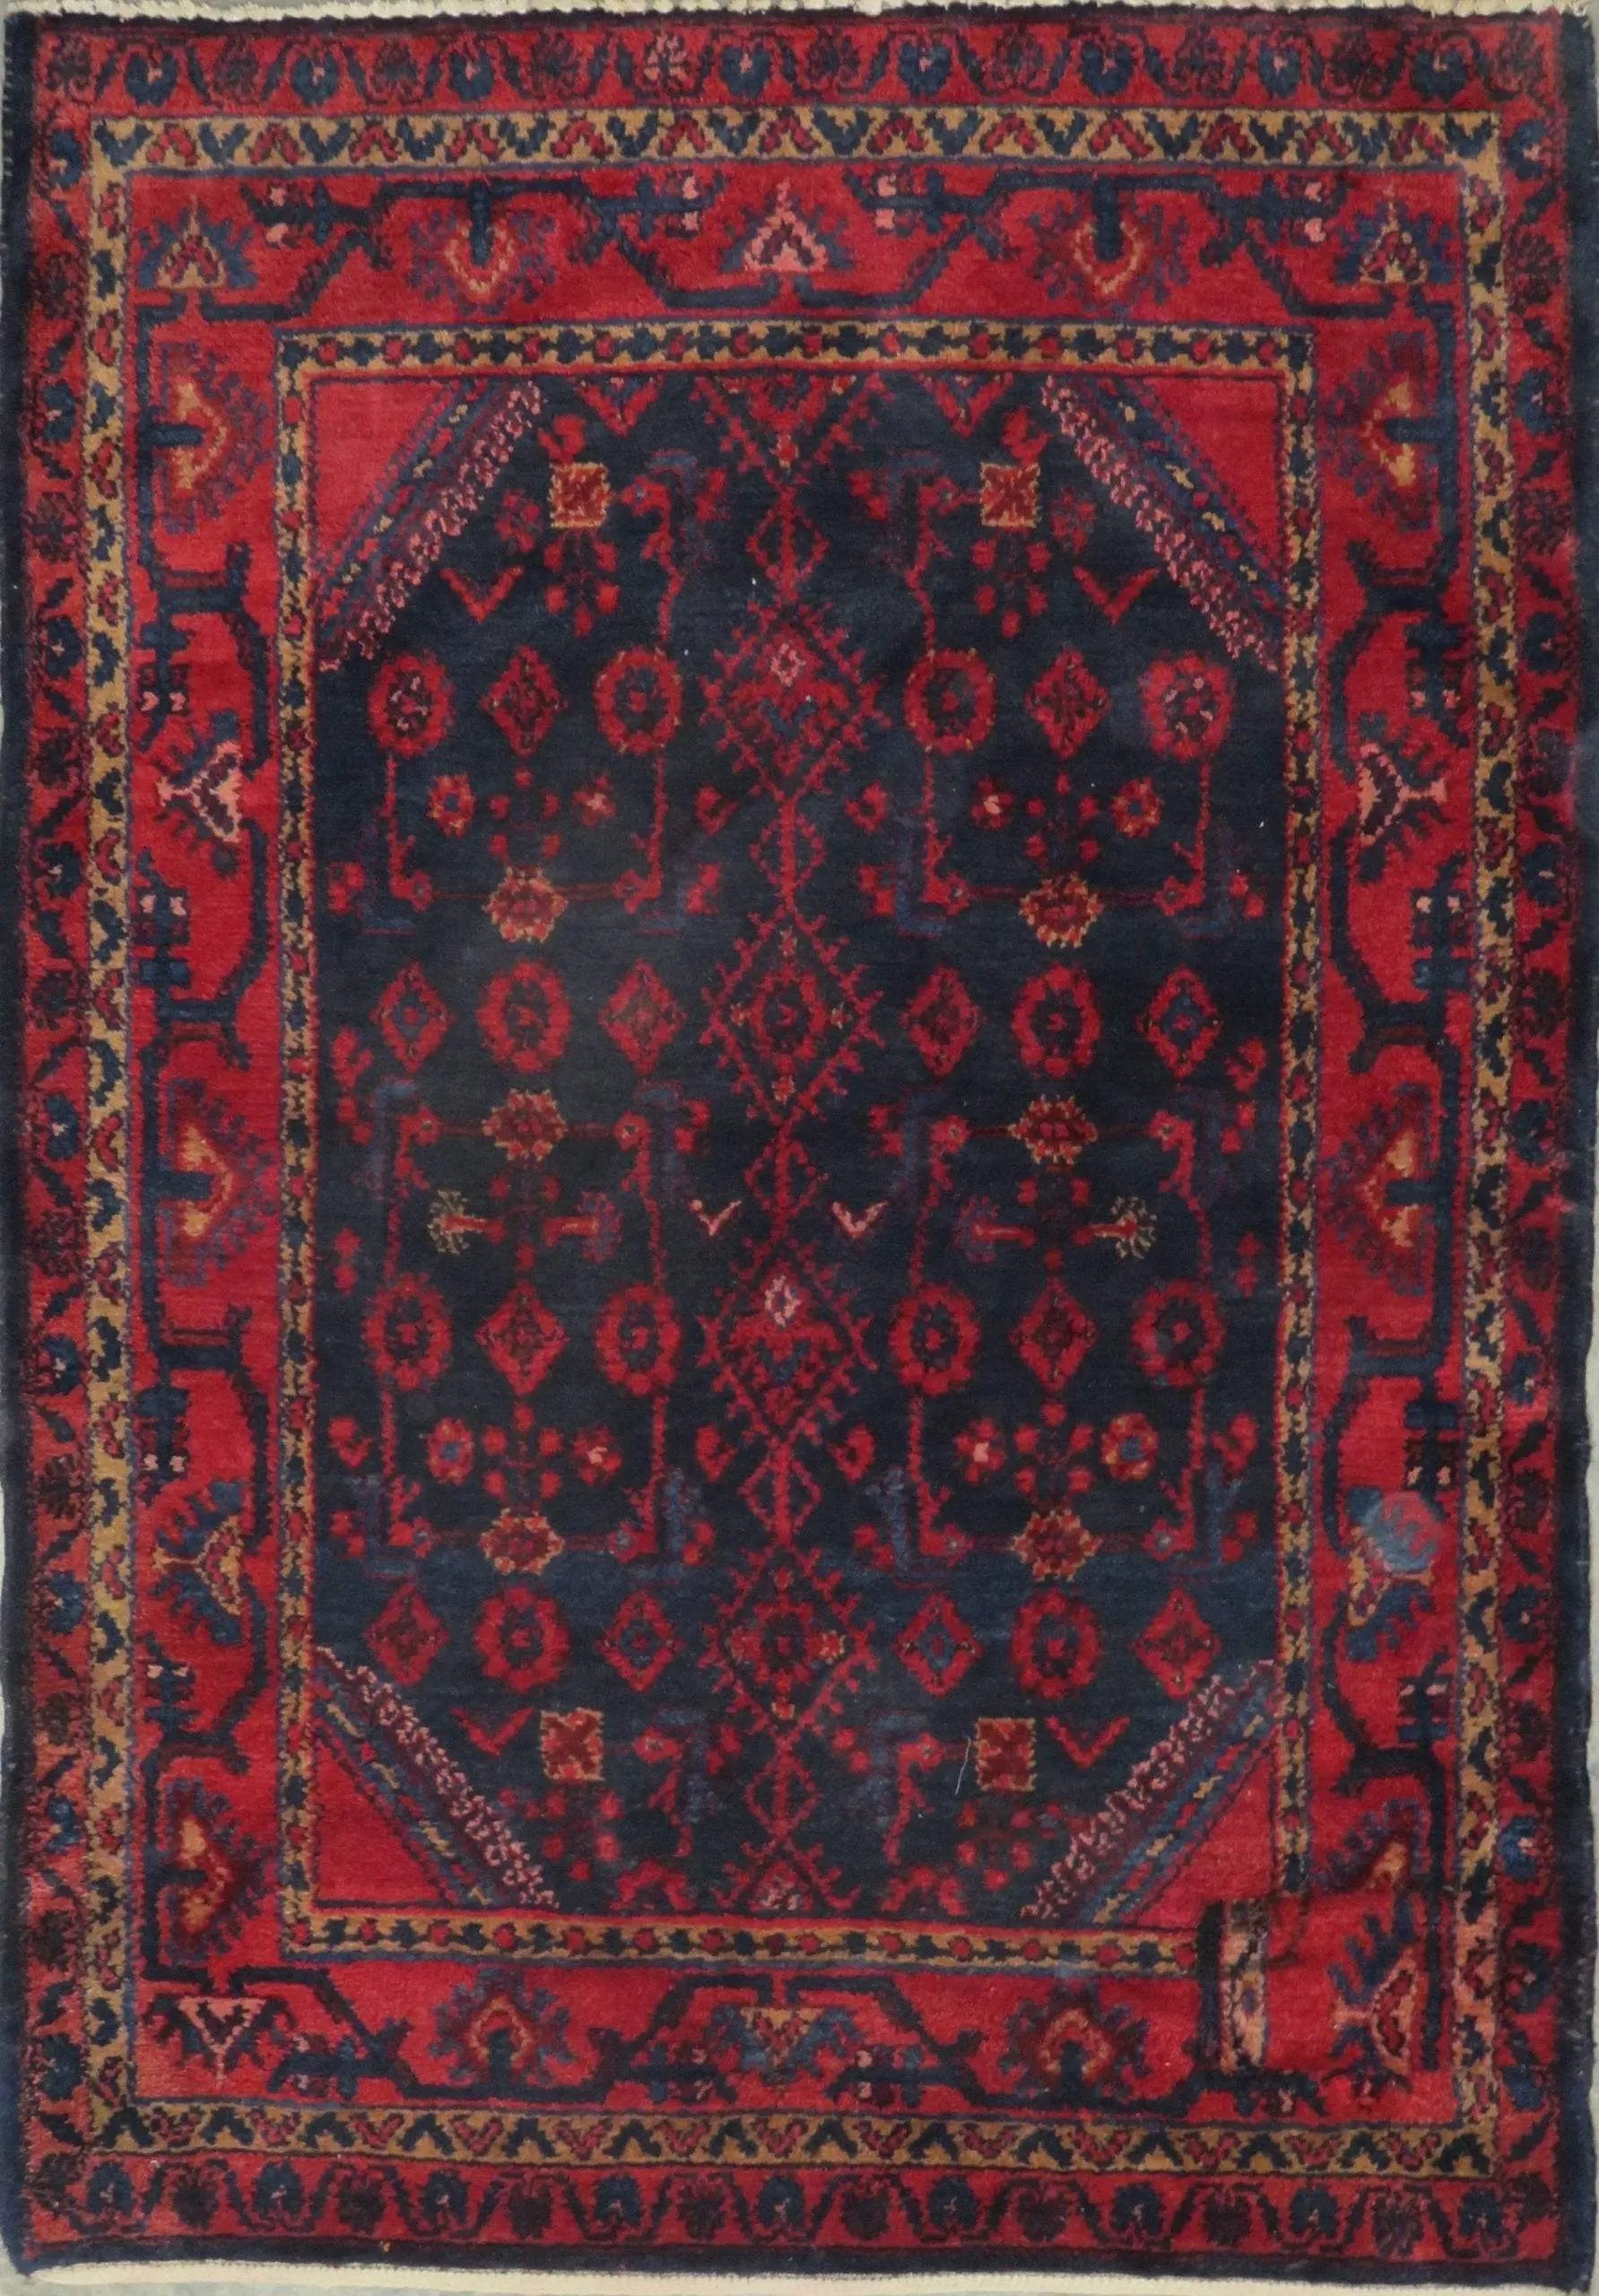 Hand-Knotted Persian Wool Rug _ Luxurious Vintage Design, 5'1" x 3'5", Artisan Crafted